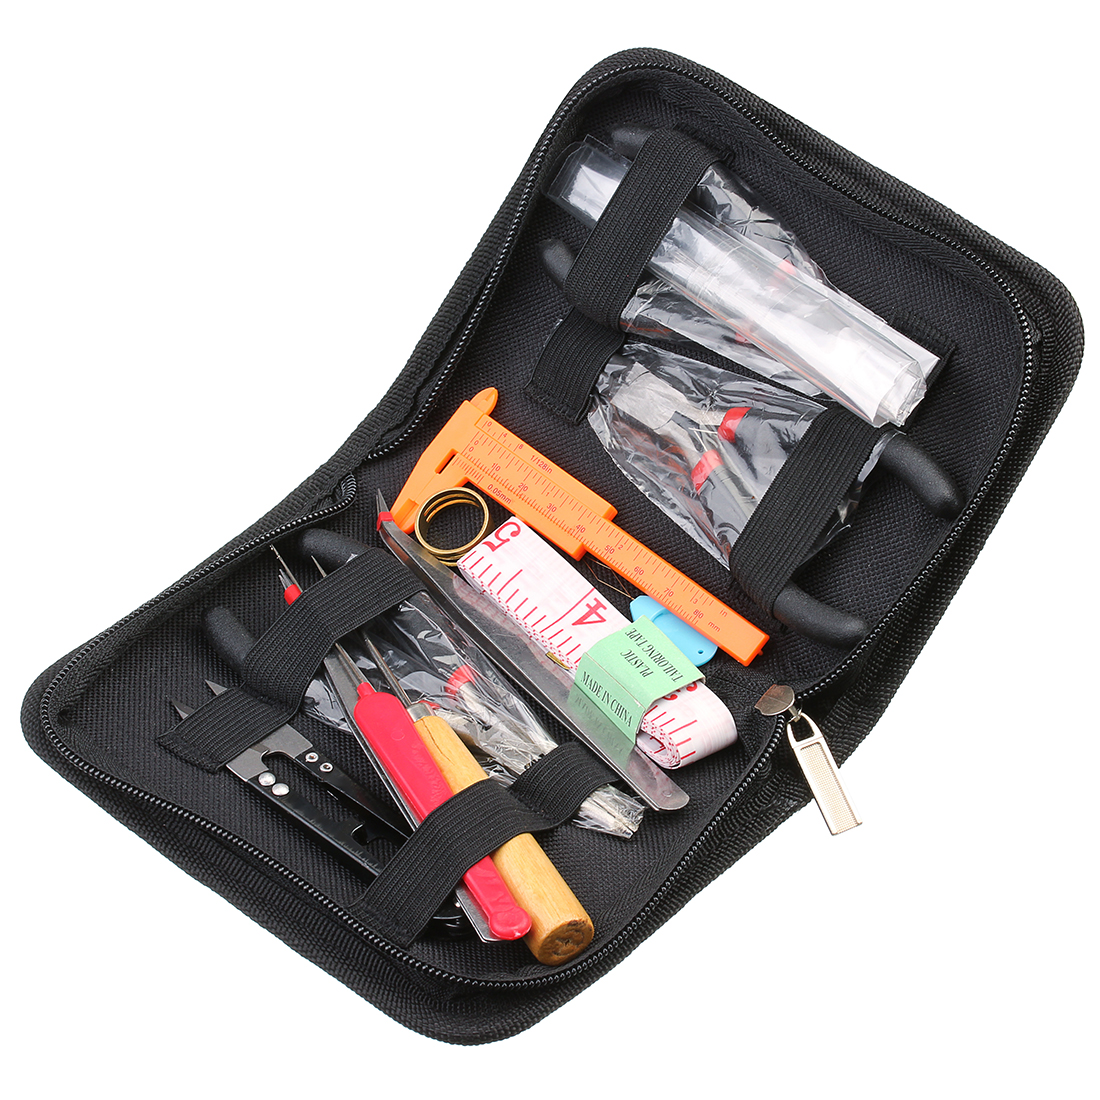 19Pcs-DIY-Jewelry-Making-Tools-Kit-with-Zipper-Storage-Case-for-Jewelry-Crafting-and-Jewelry-Repair-1277751